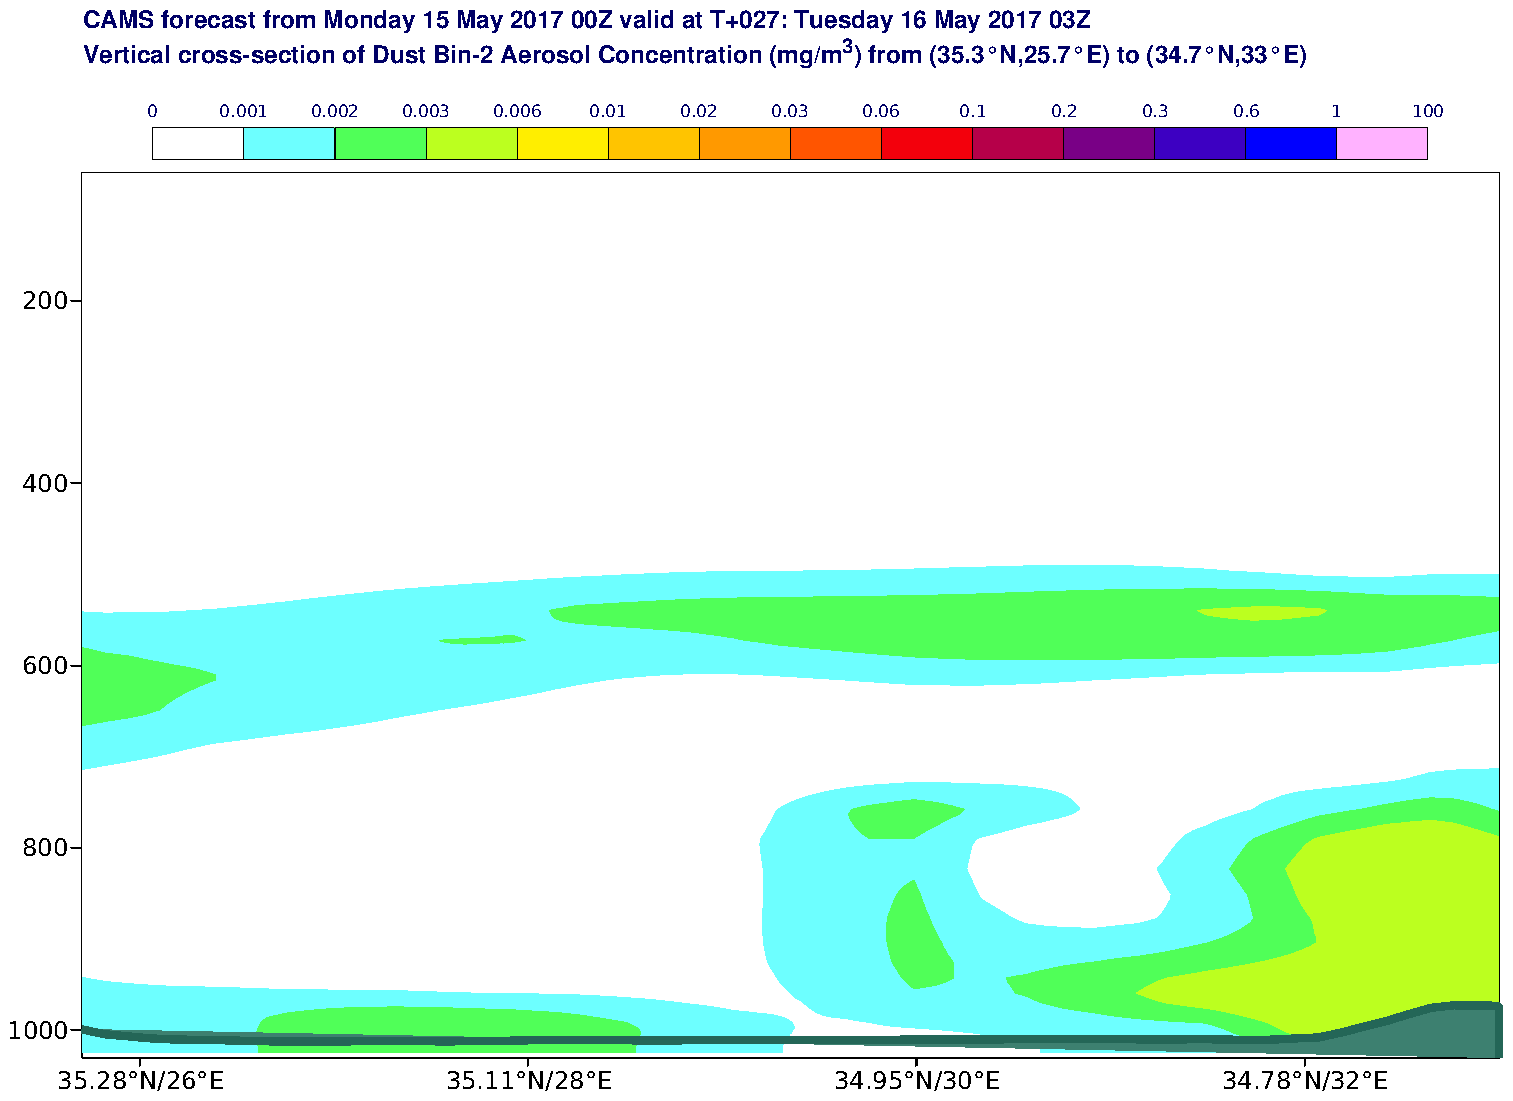 Vertical cross-section of Dust Bin-2 Aerosol Concentration (mg/m3) valid at T27 - 2017-05-16 03:00